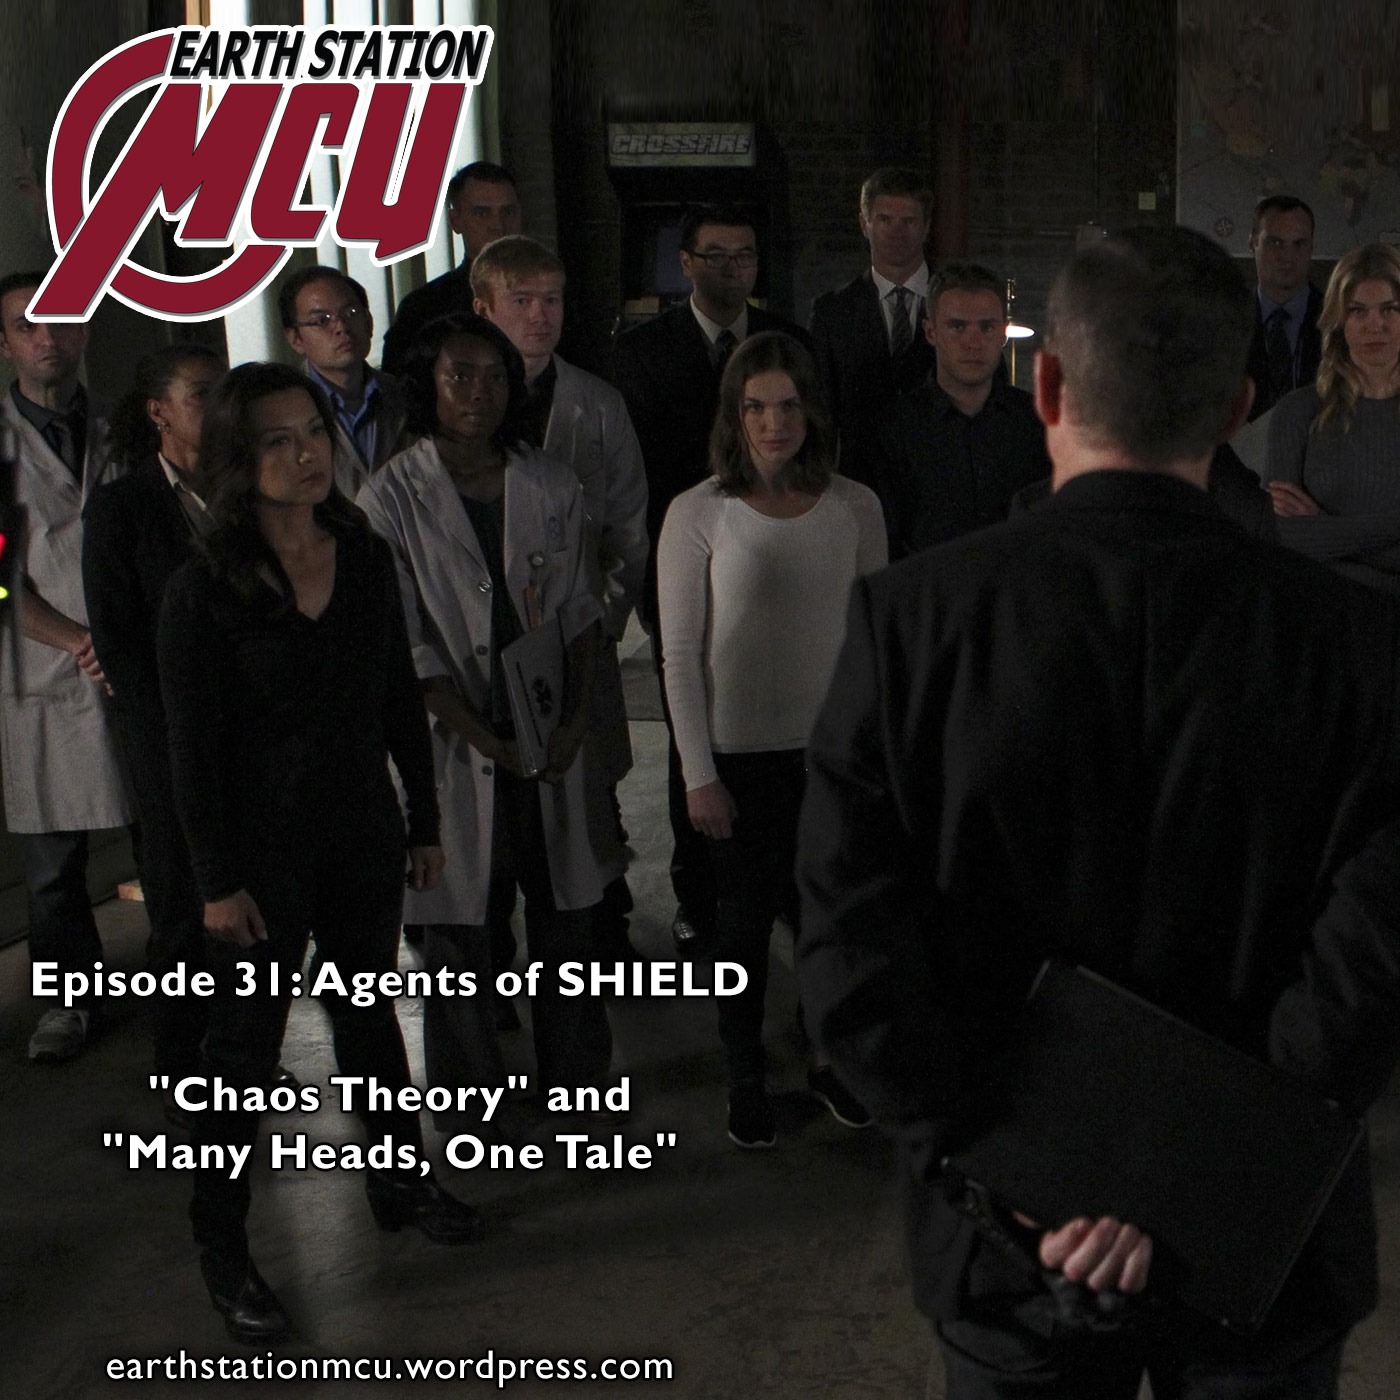 Earth Station MCU Episode 31: Agents of SHIELD - ”Chaos Theory” and ”Many Heads, One Tale”